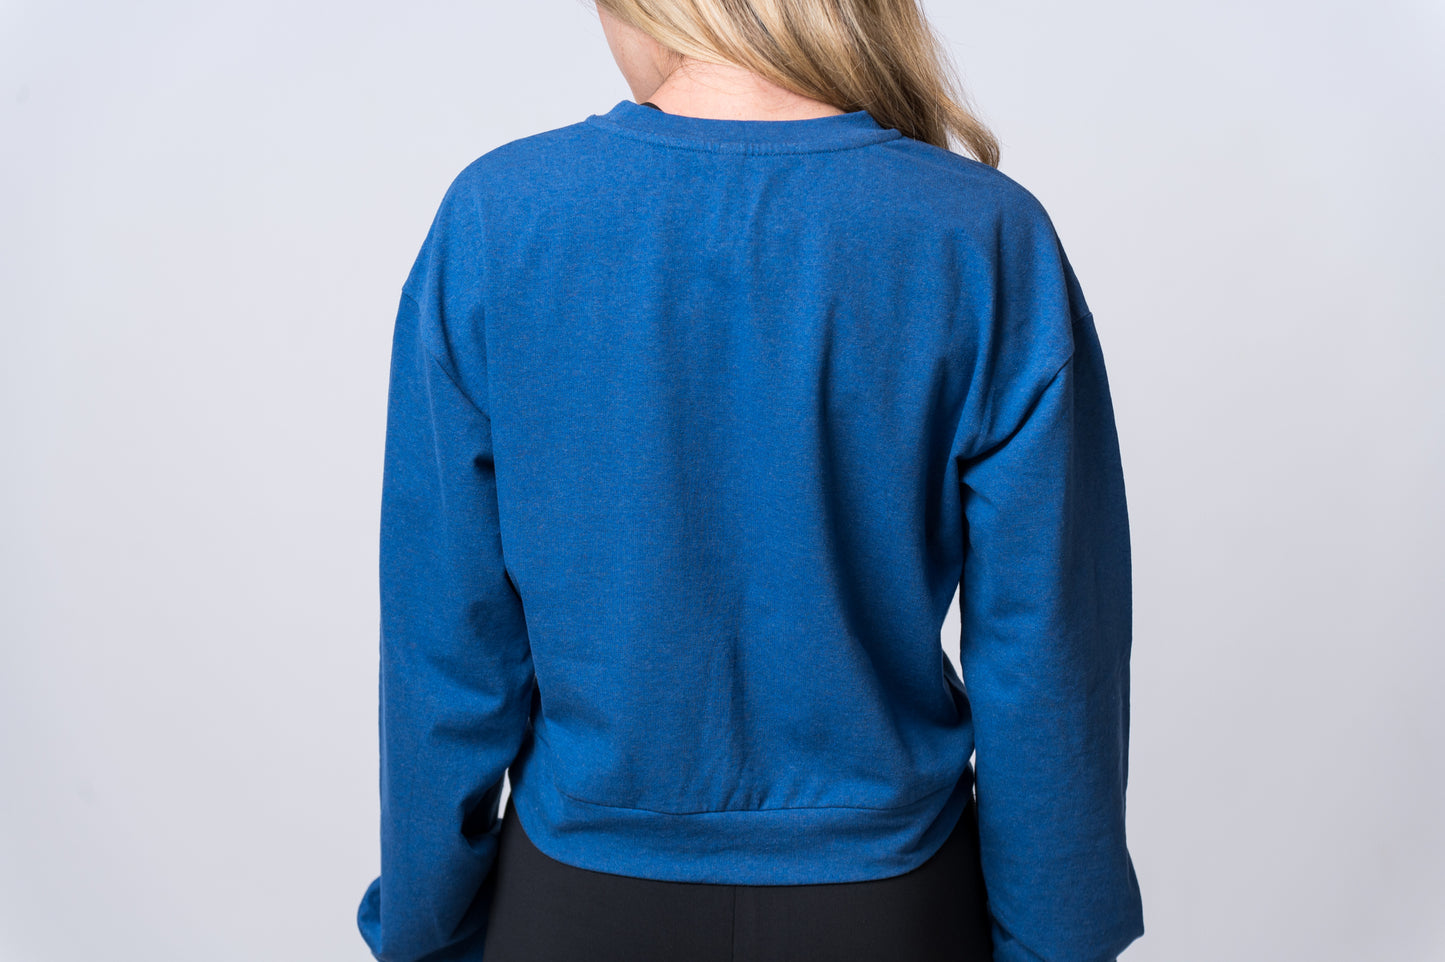 Woman wearing a blue sweatshirt with knot and black drawstring lounge pants. Back of clothing is being shown